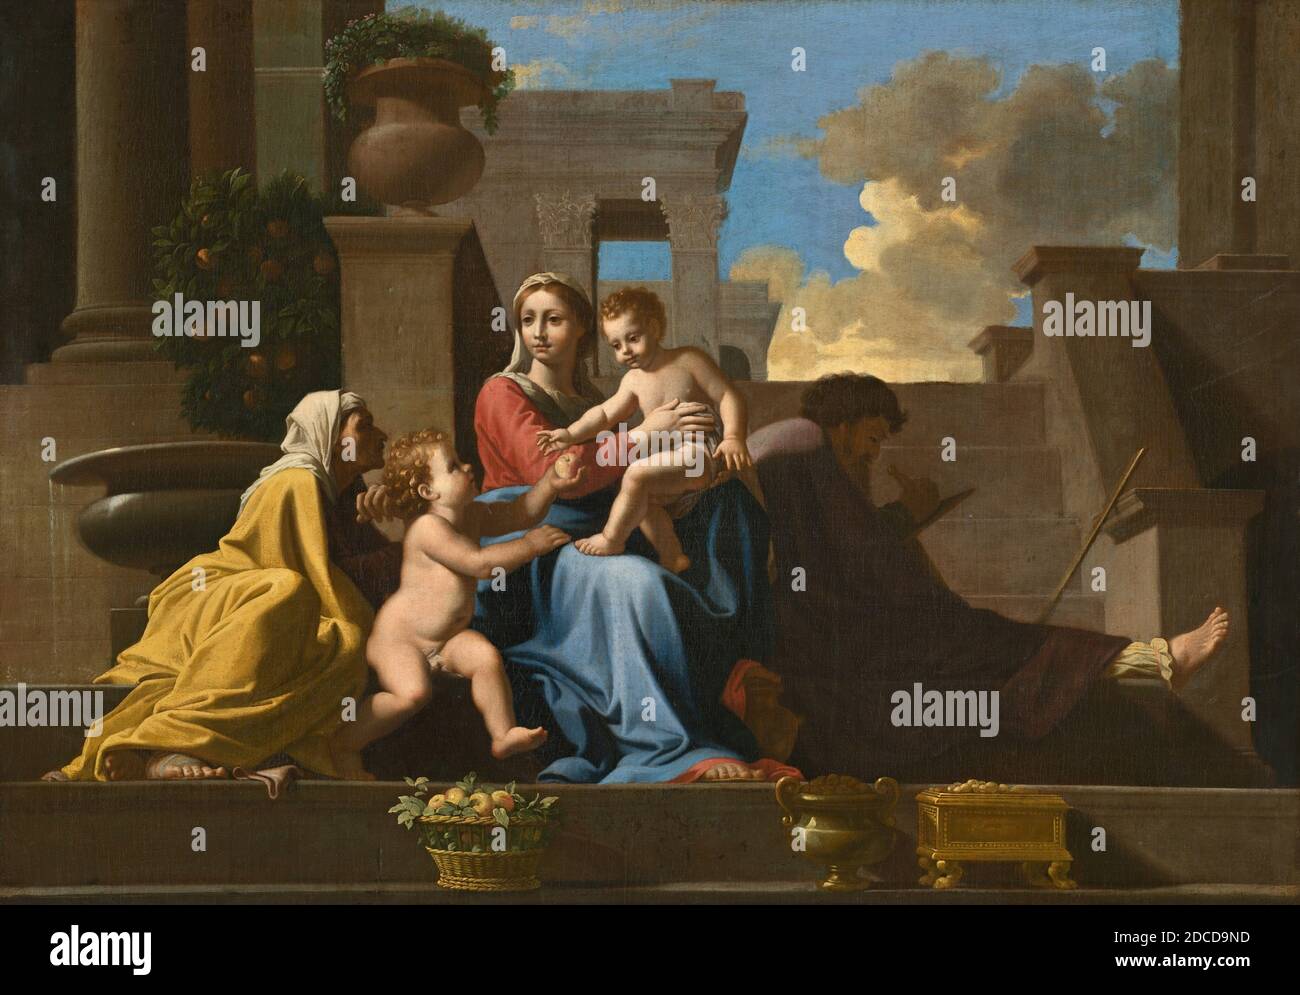 Anonymous Artist, (painter), Nicolas Poussin, (related artist), French, 1594 - 1665, The Holy Family on the Steps, 1648, oil on canvas, overall: 68.7 x 97.8 cm (27 1/16 x 38 1/2 in.), framed: 89.7 x 118.4 x 6.4 cm (35 5/16 x 46 5/8 x 2 1/2 in Stock Photo